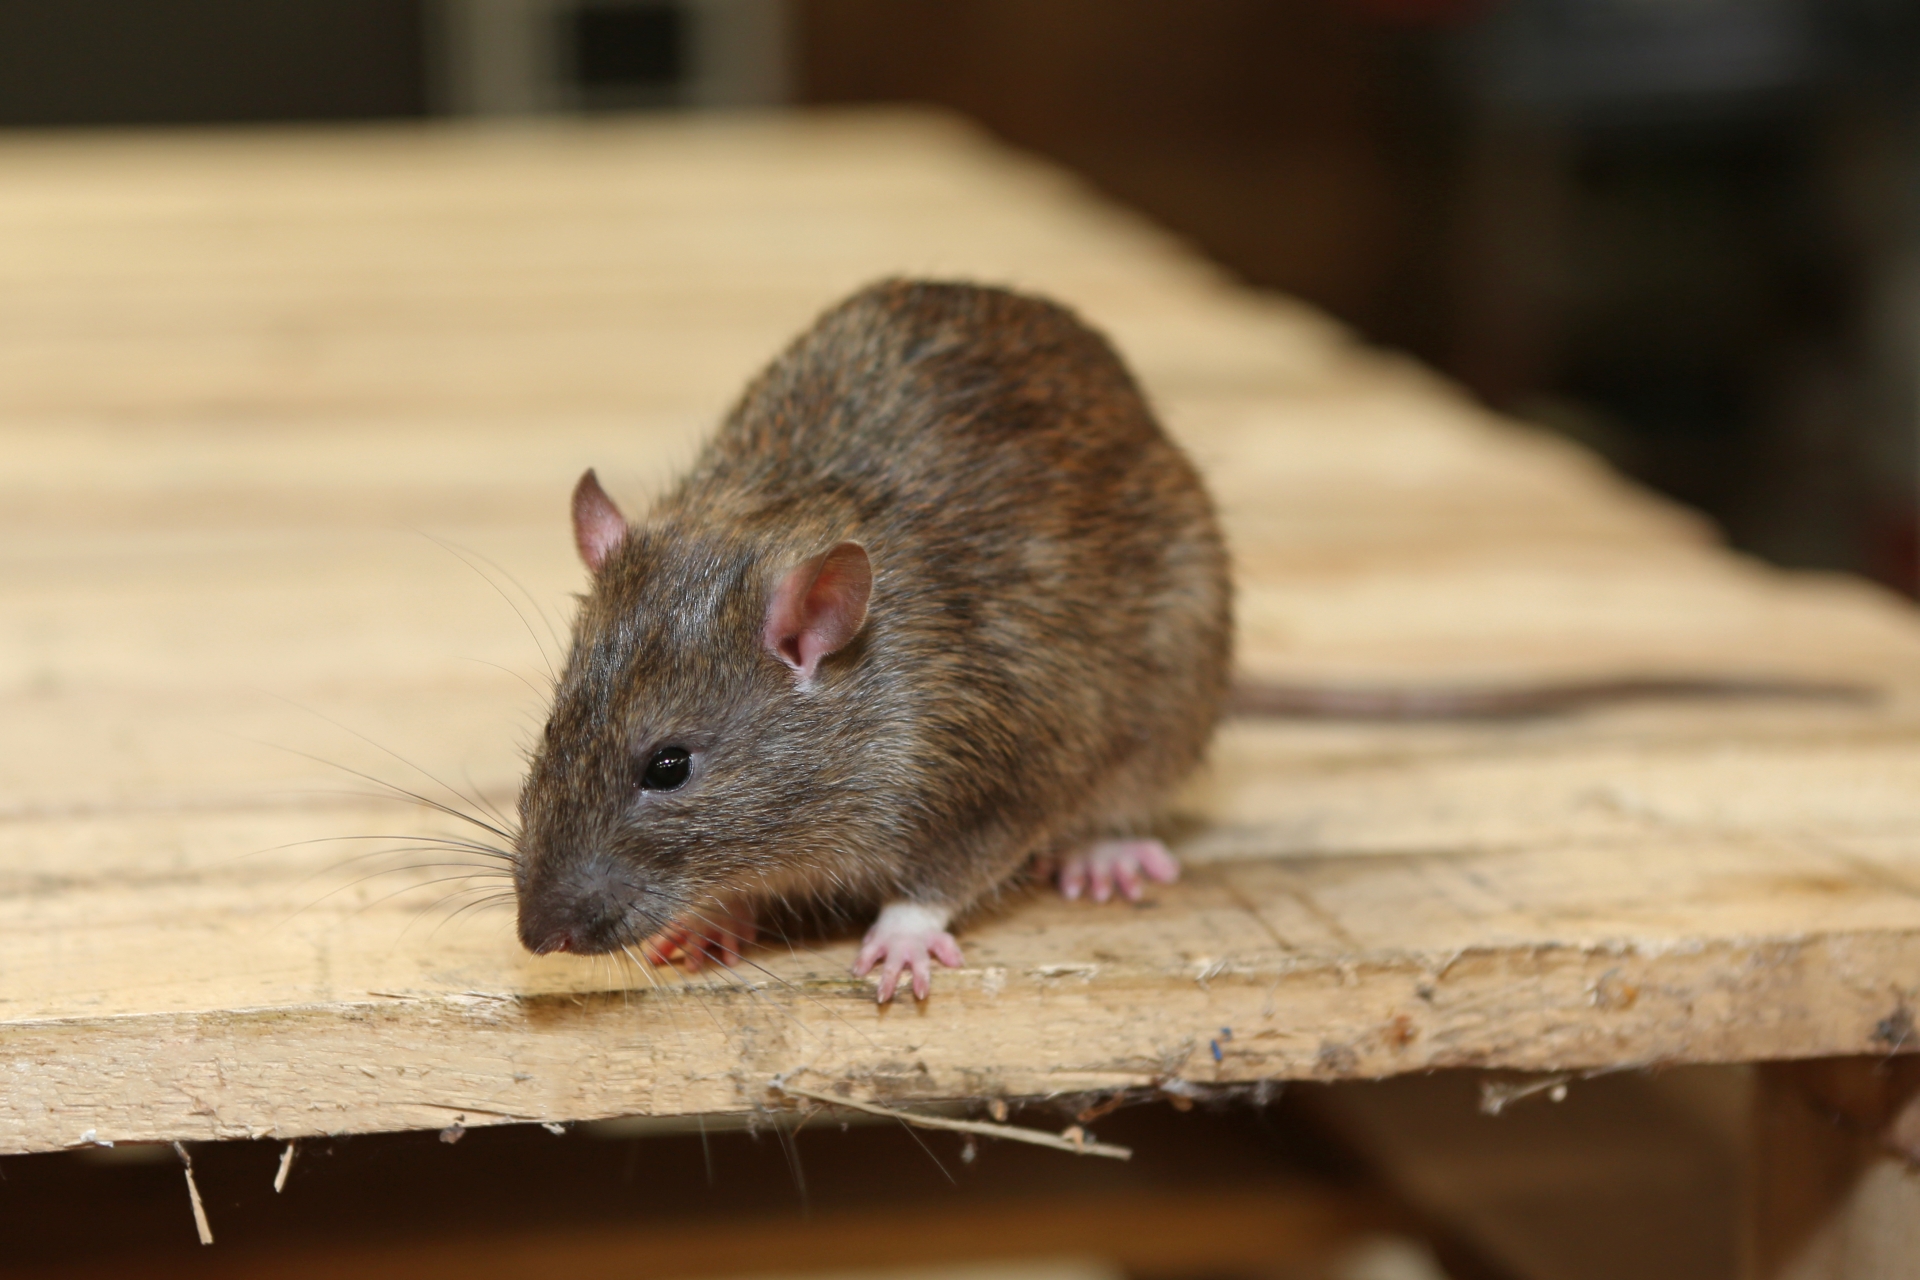 Rat extermination, Pest Control in Woolwich, SE18. Call Now 020 8166 9746